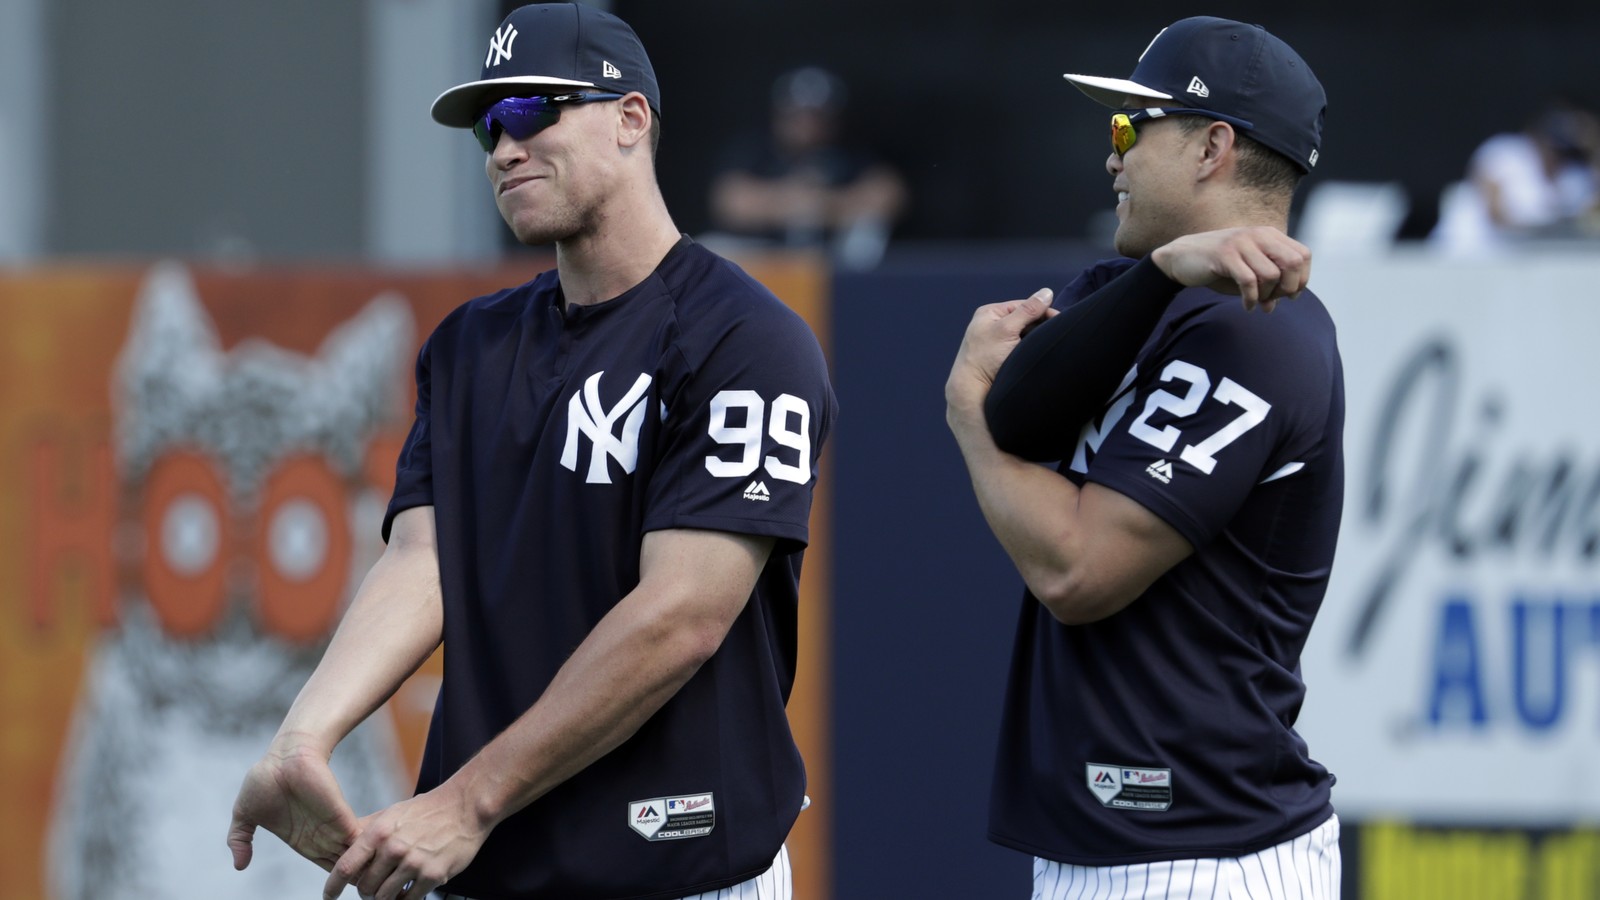 The Yankees' Stanton and Judge: The Good and the Bad - The Atlantic